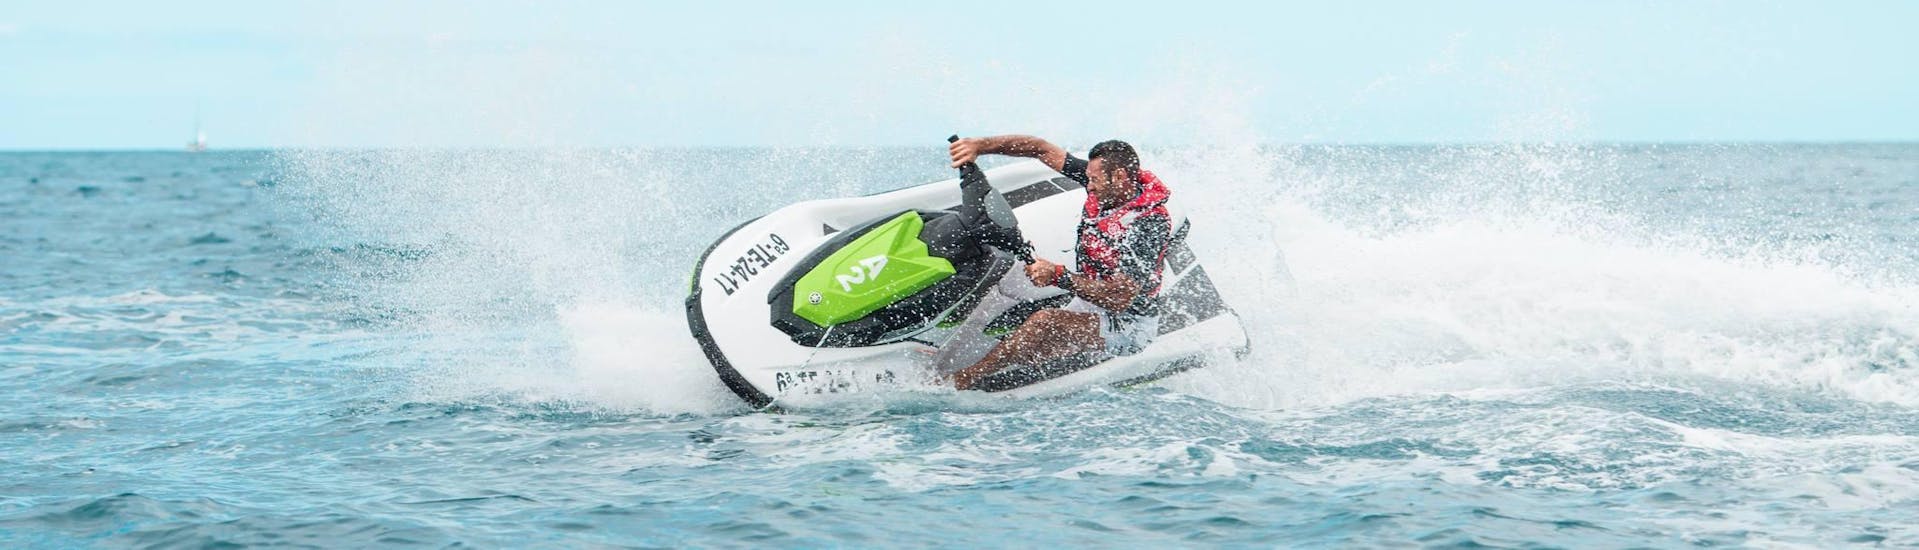 A man on a jet ski from Watersports Tenerife in Costa Adeje.